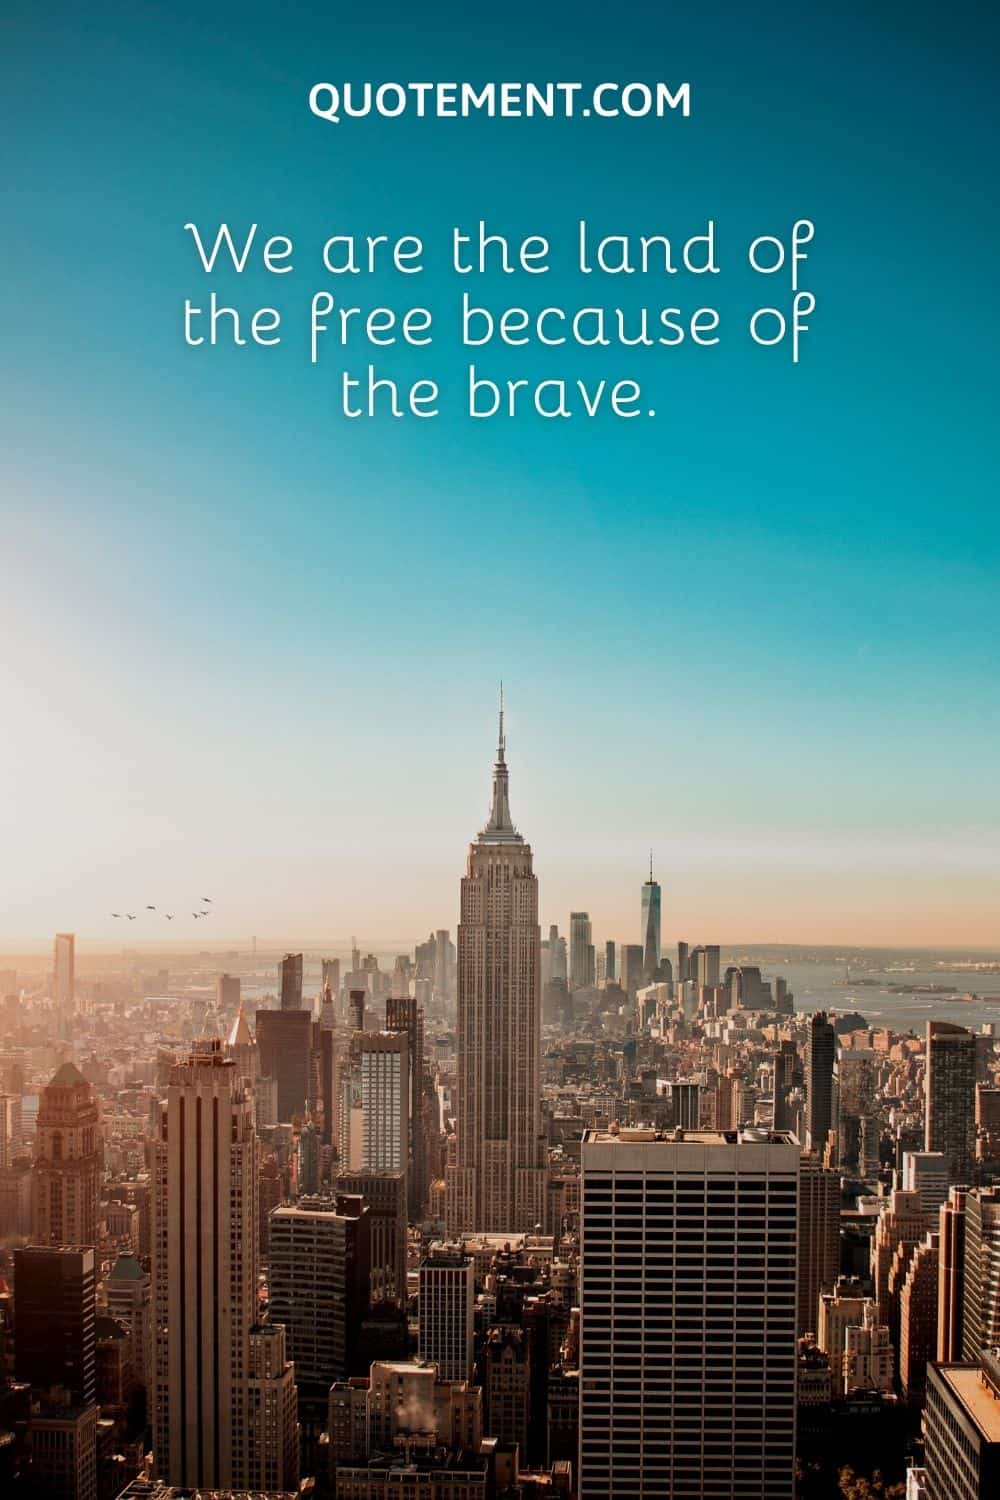 We are the land of the free because of the brave